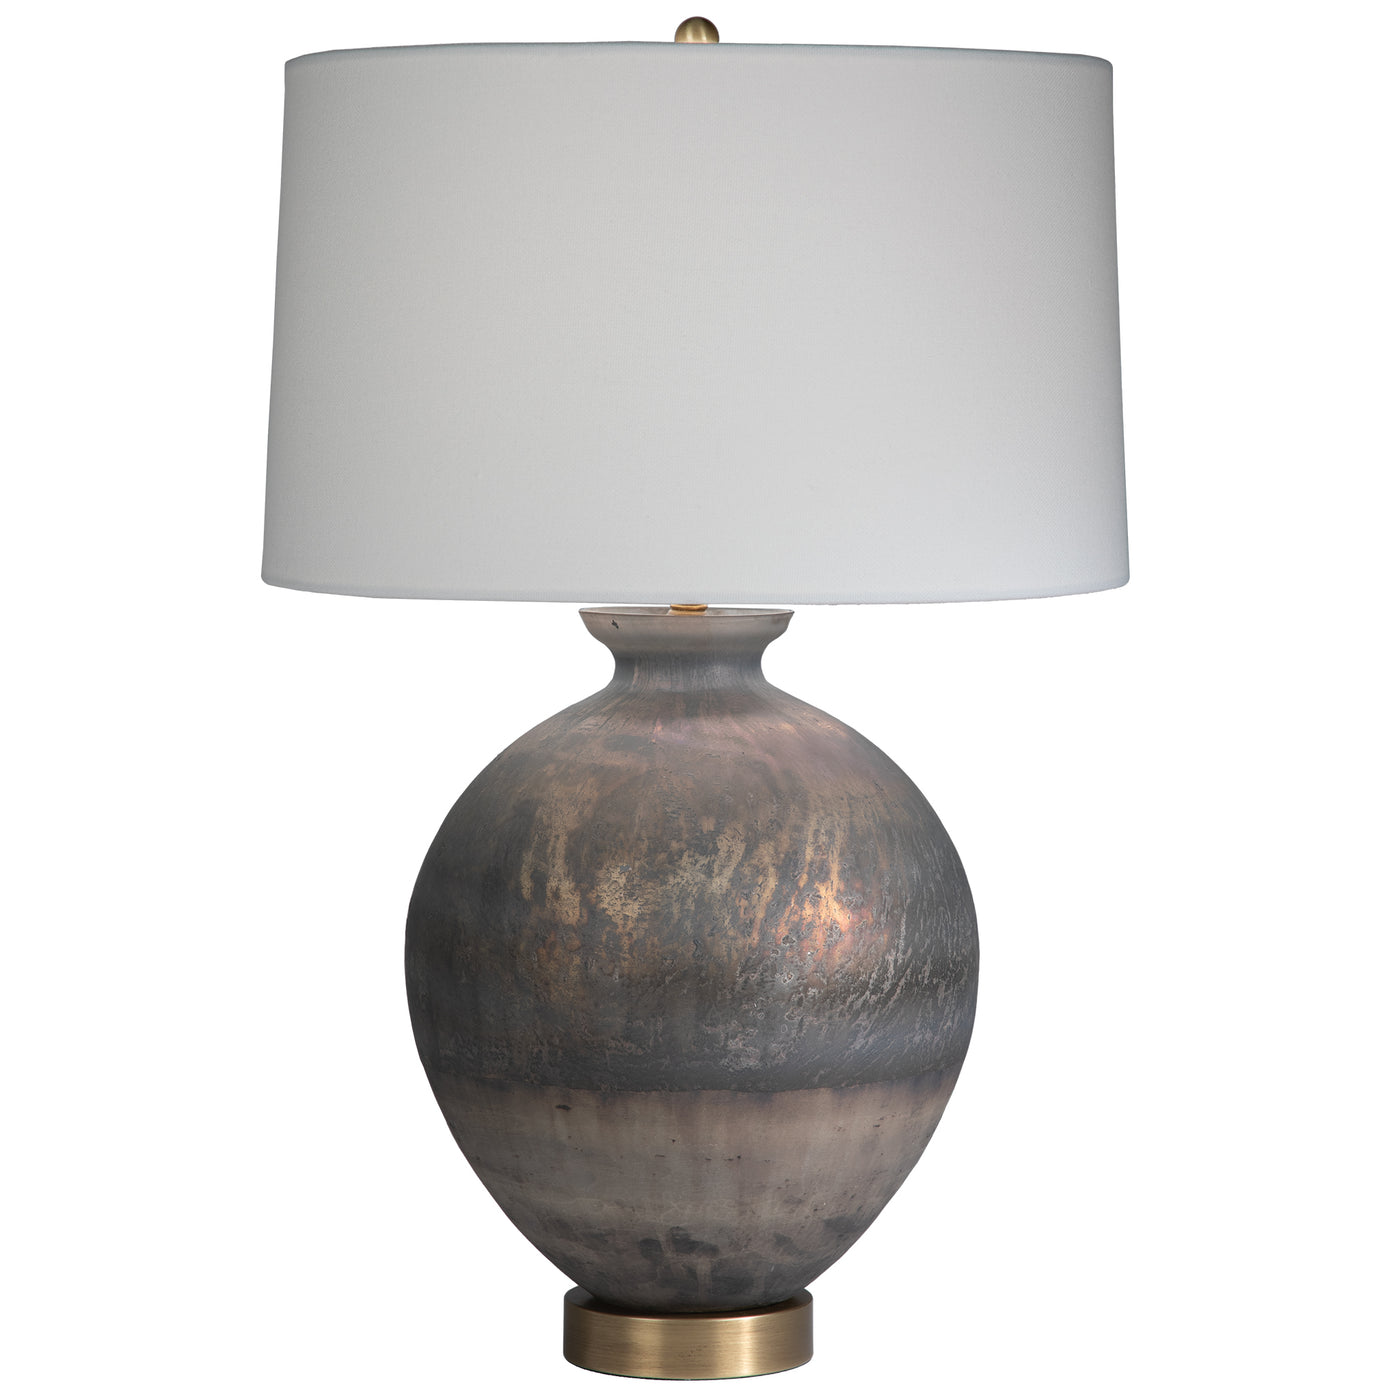 TABLE LAMP AB BRASS BALL